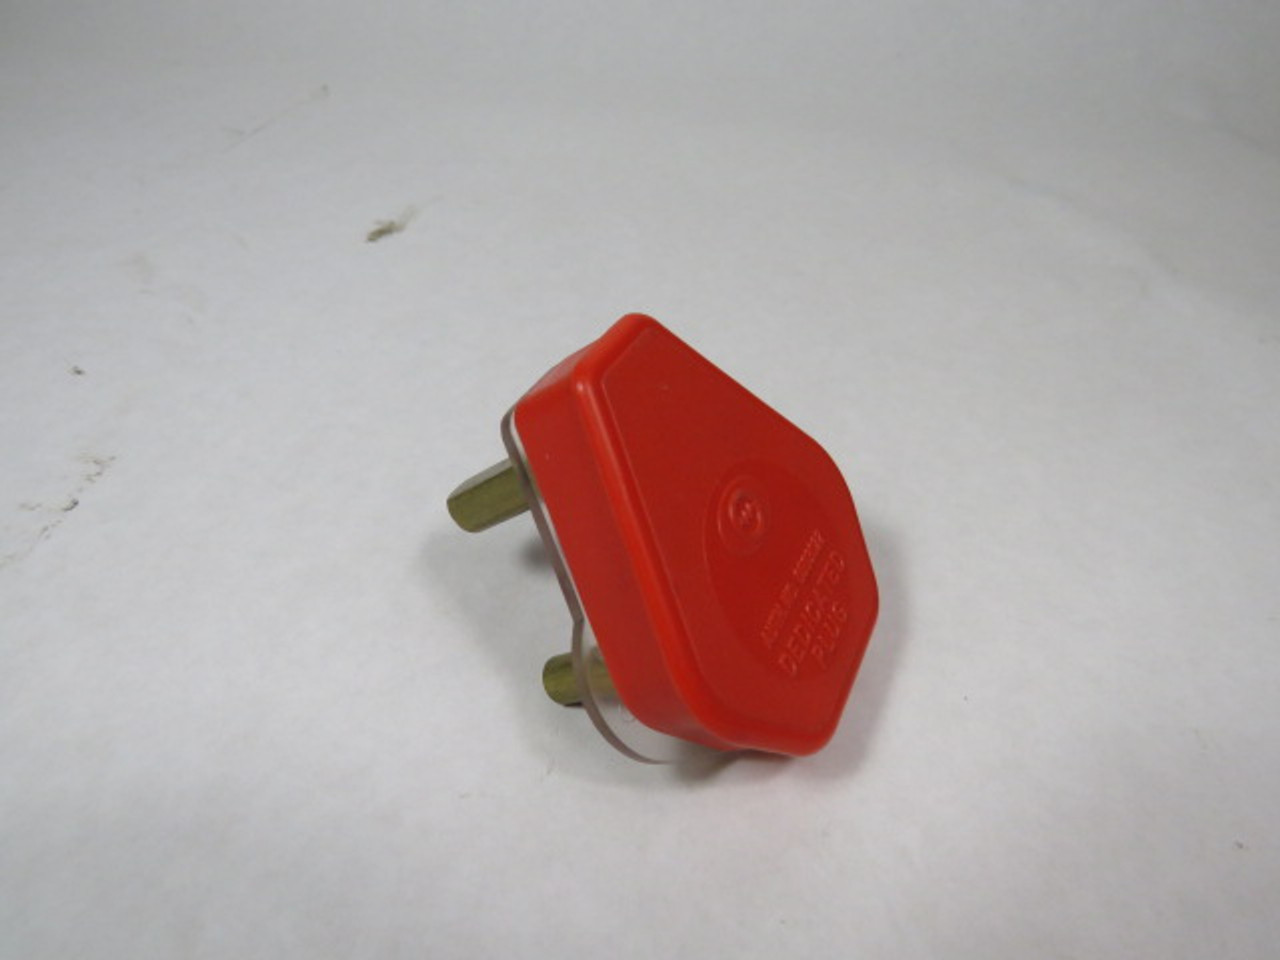 Crabtree 1054RDP Red Dedicated Plug Top 16A 250V 3W 2P USED